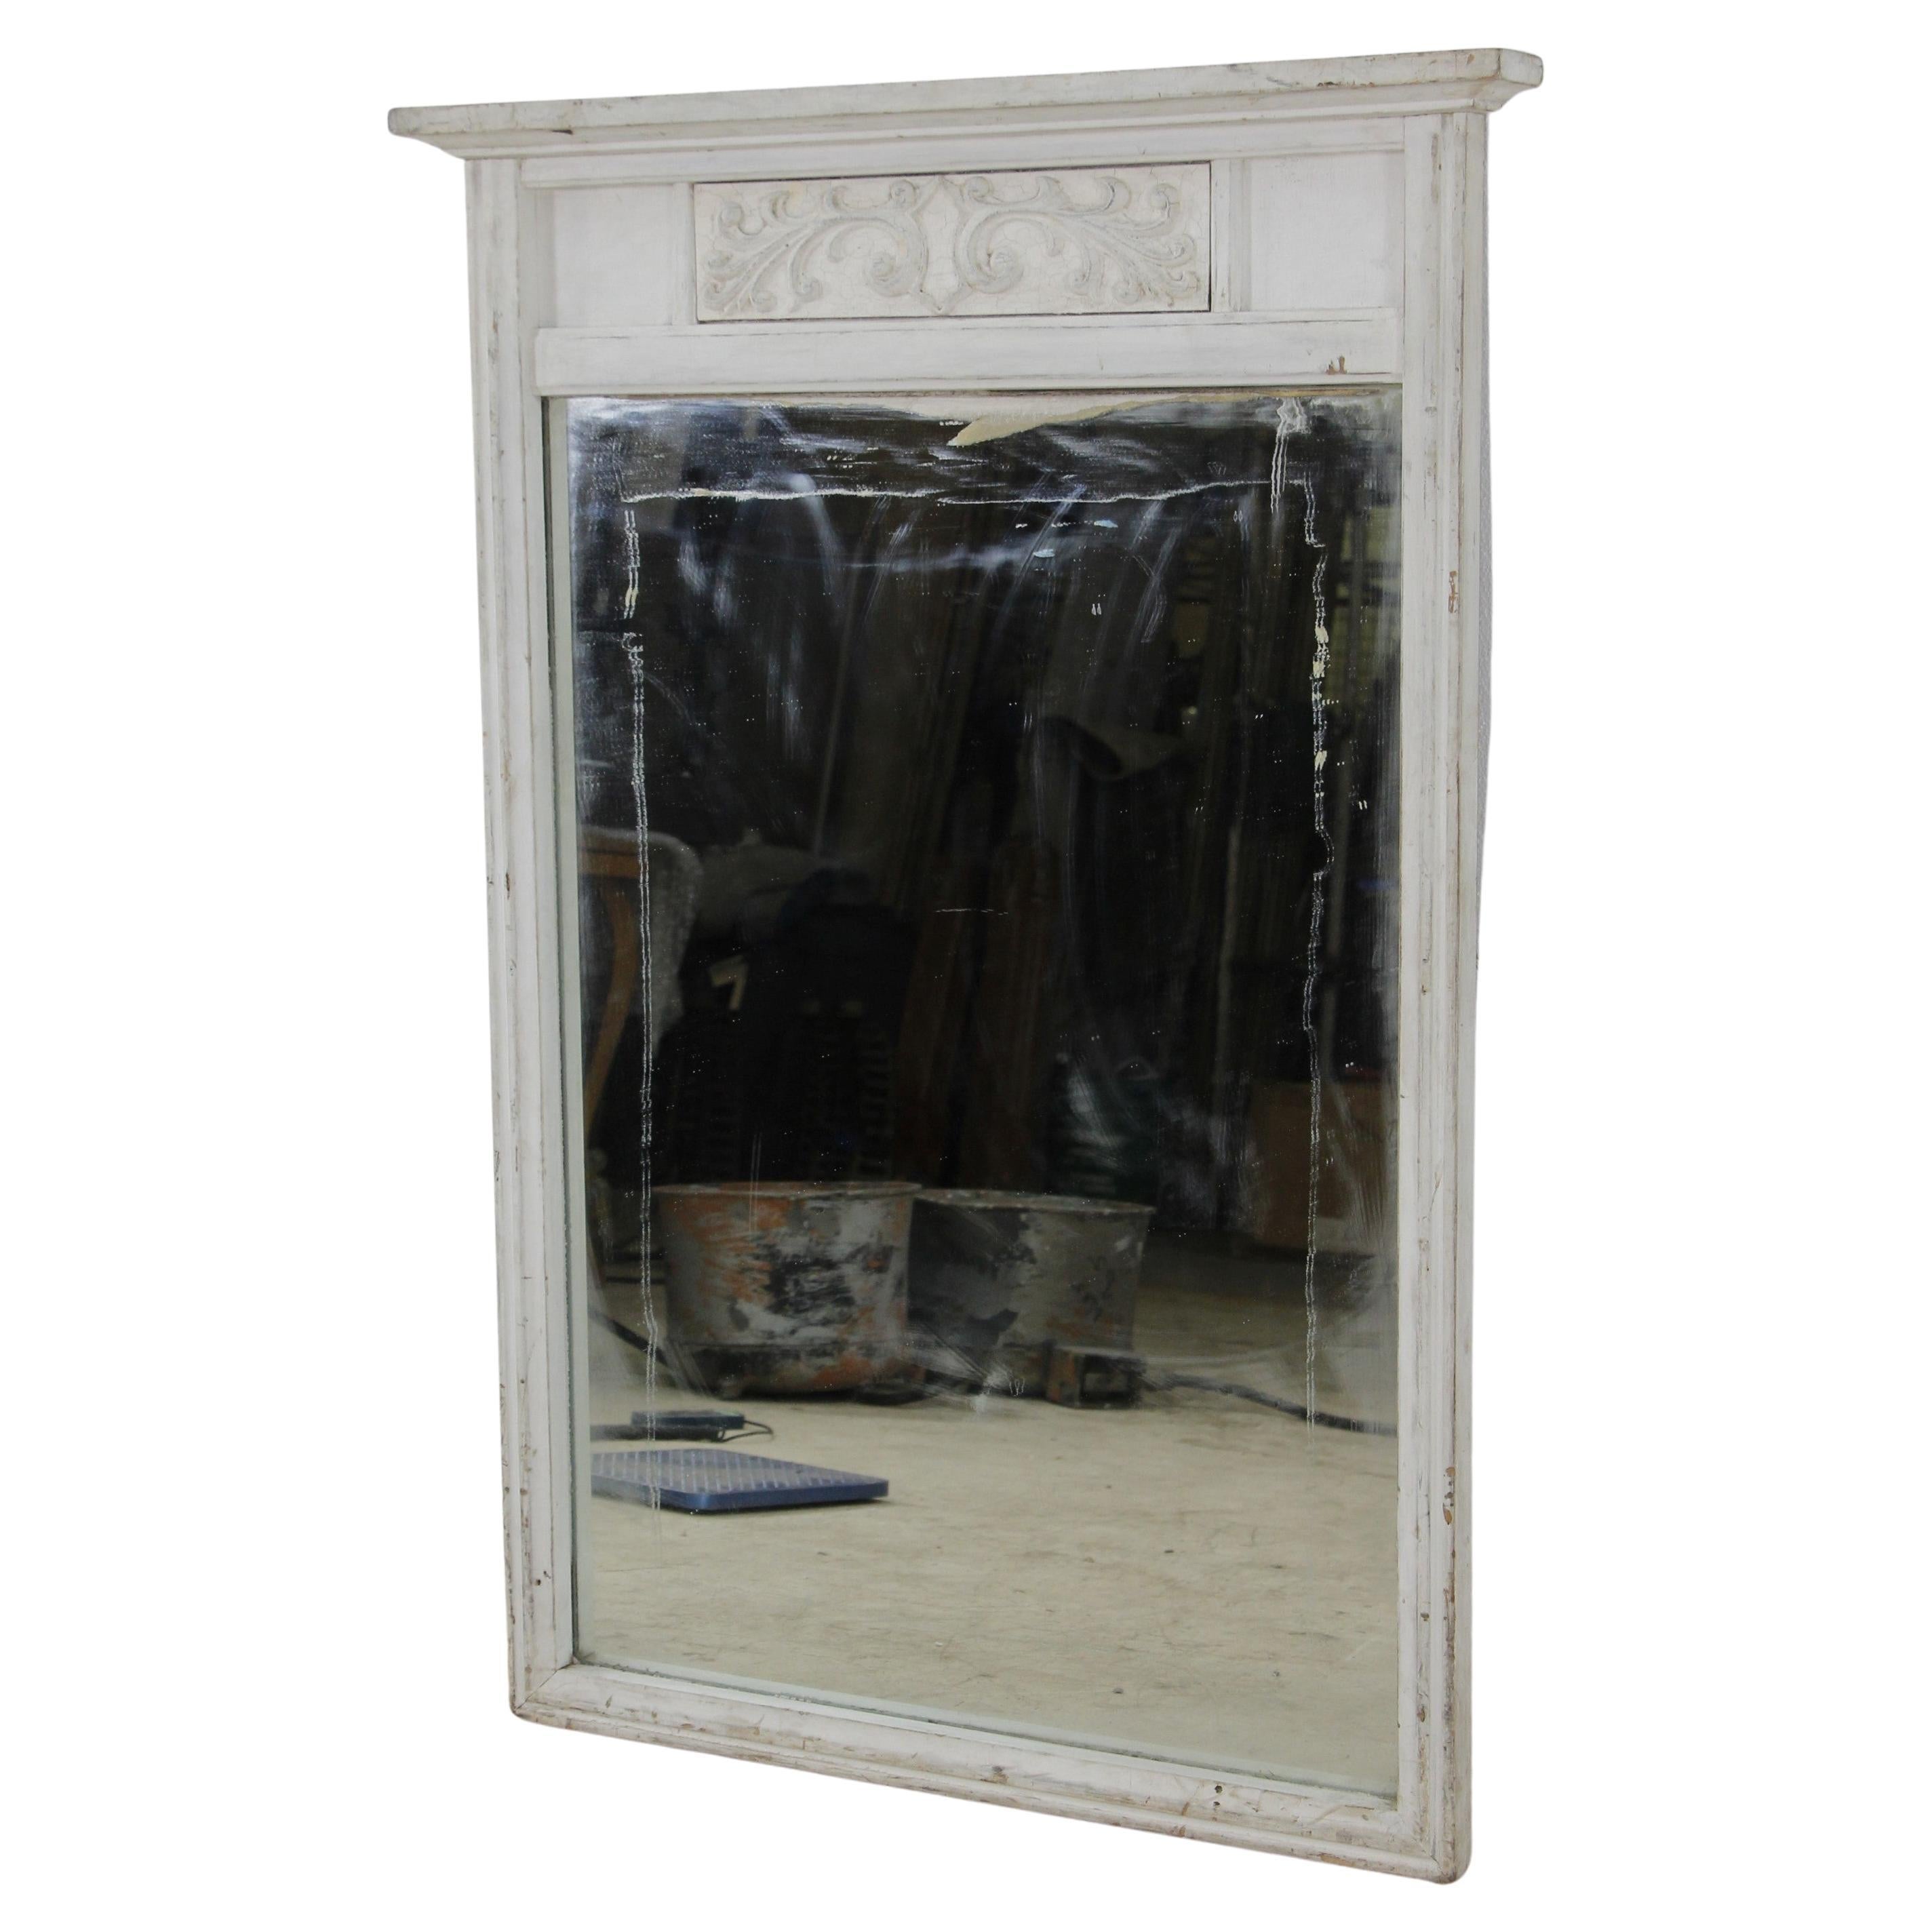 20th Century wood mirror with a carved floral design at the top. Original white finish. Please note, this item is located in our Scranton, PA location.